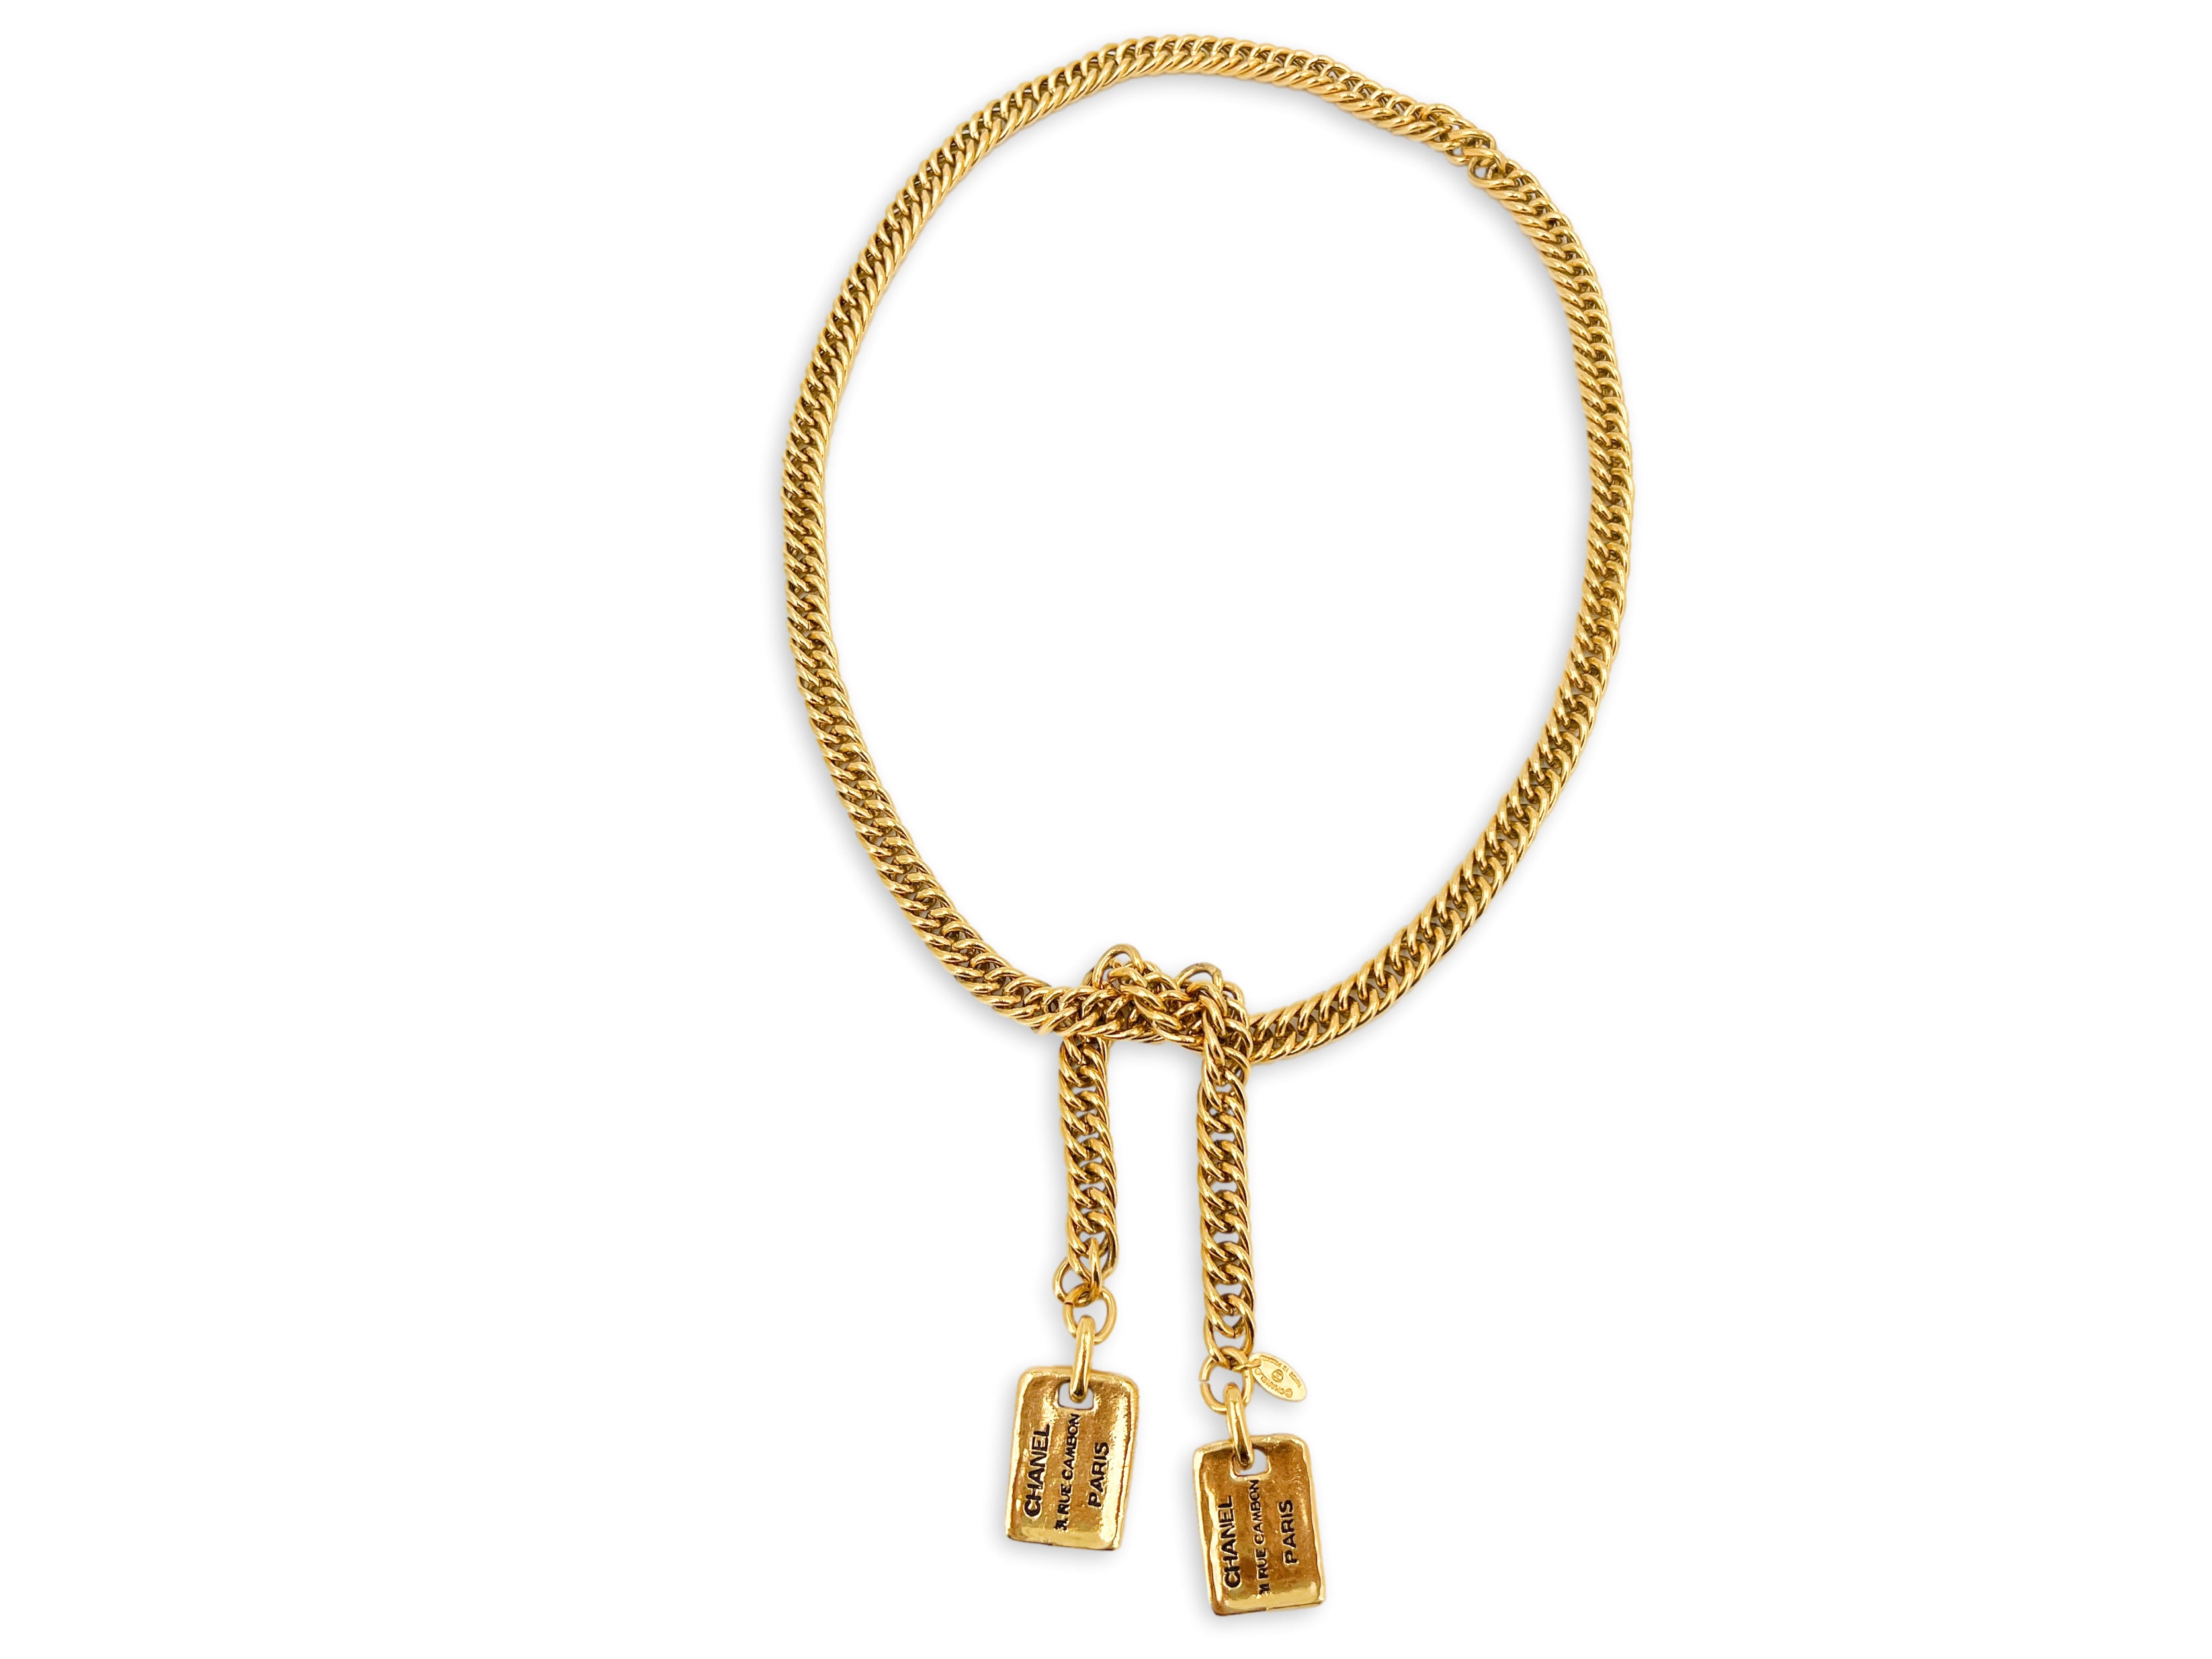 chanel pearl necklace gold - Gem